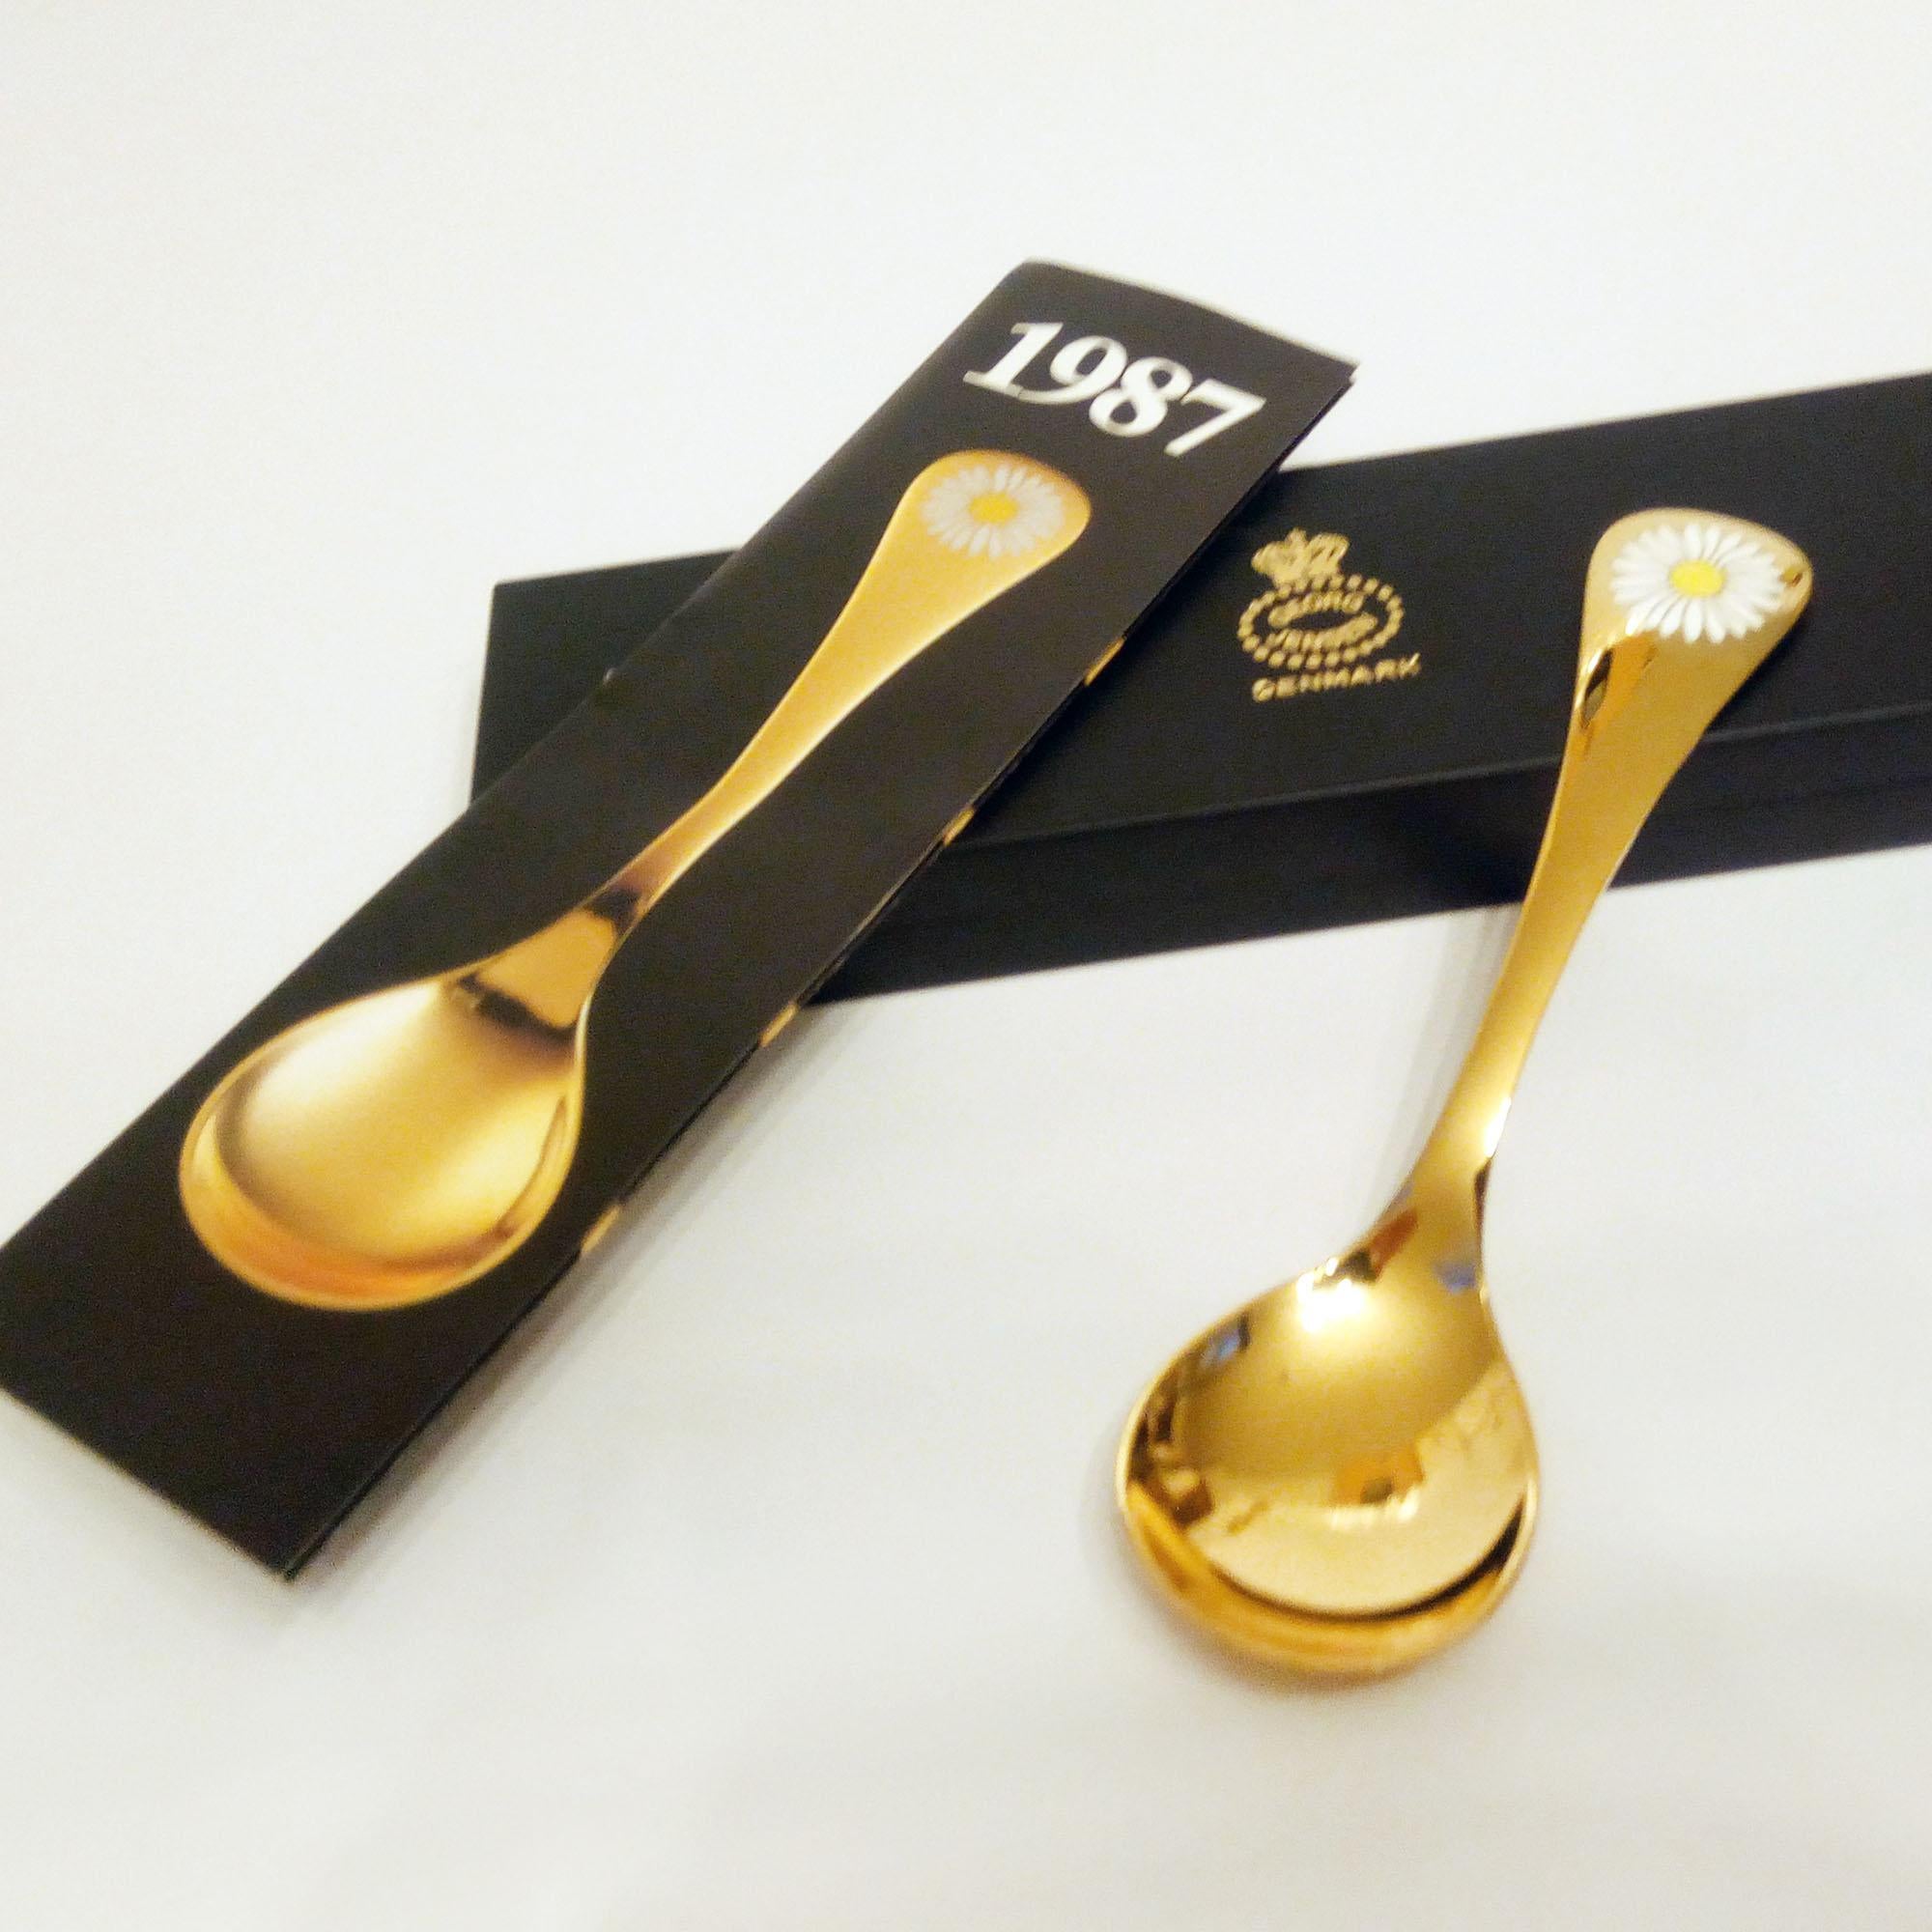 Annual Spoon 1987 in original box, designed by Annelise Björner, edited by Georg Jensen.
Annual Spoons series began in 1971. Each spoon is crafted in sterling silver, then gold plated and enameled with a wildflower chosen for that year. The 1987